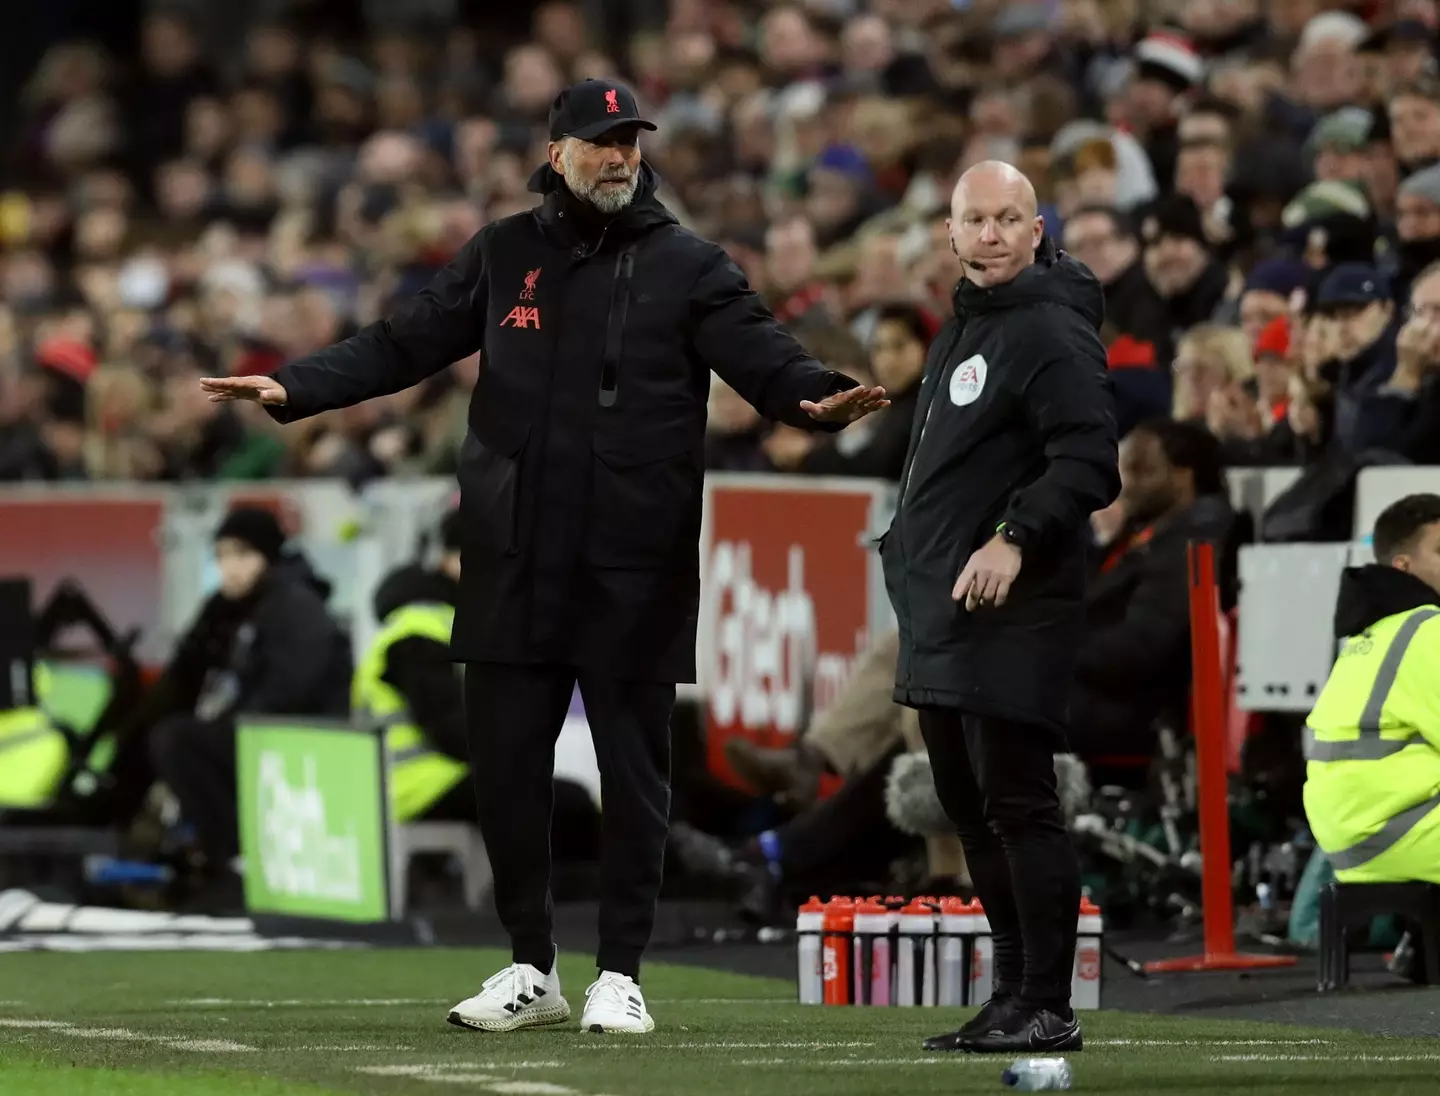 Klopp was not happy with the officials. Image: Alamy